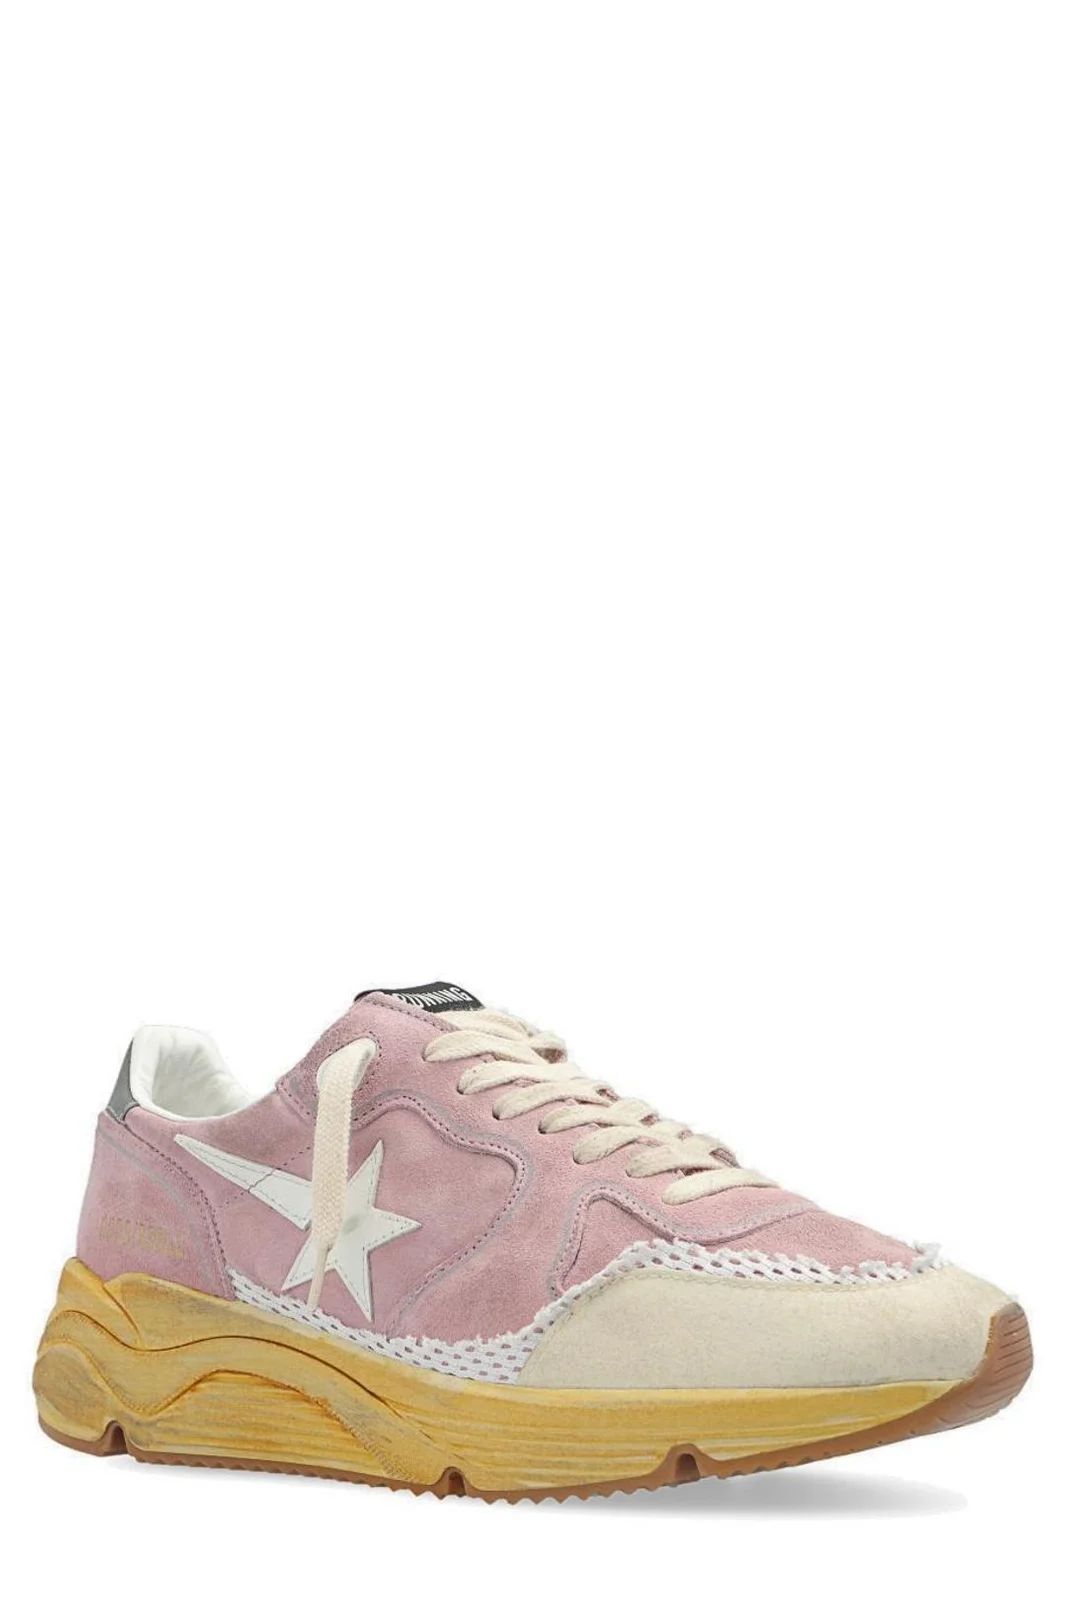 Golden Goose Deluxe Brand Running Lace-Up Sneakers | Cettire Global